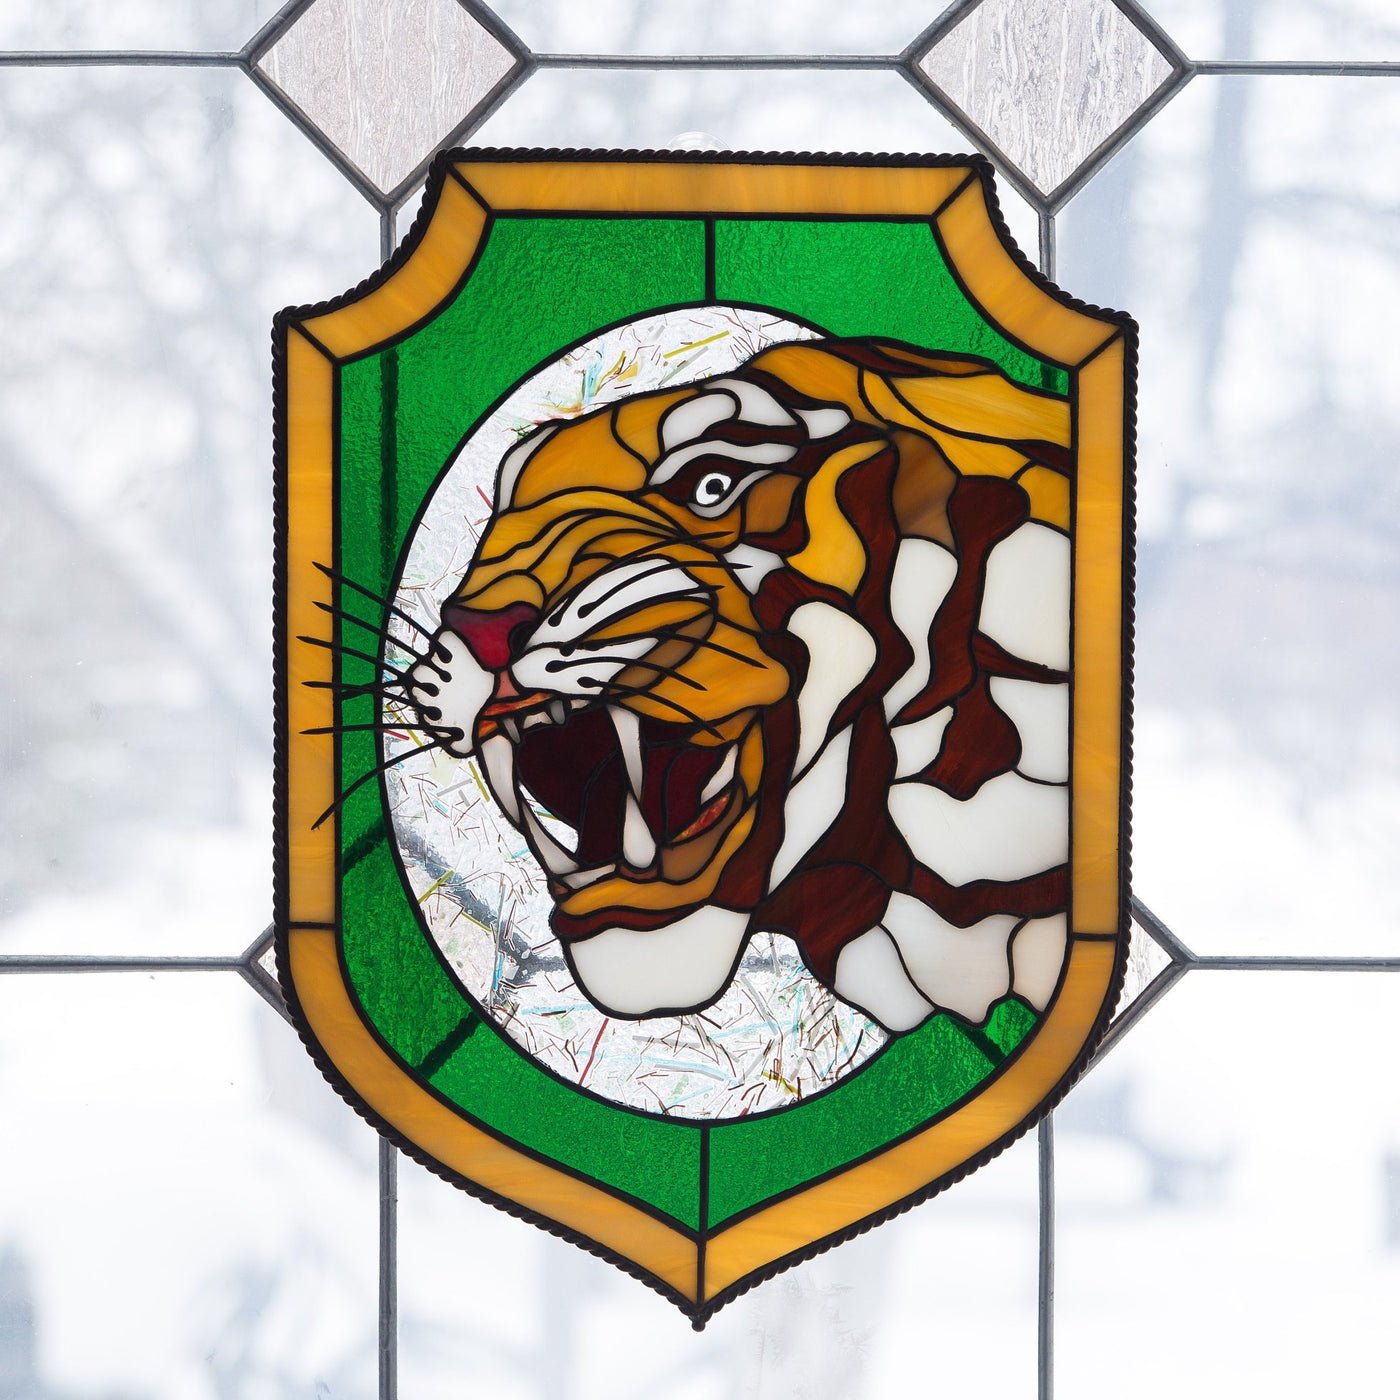 Tiger showing his fangs panel of stained glass